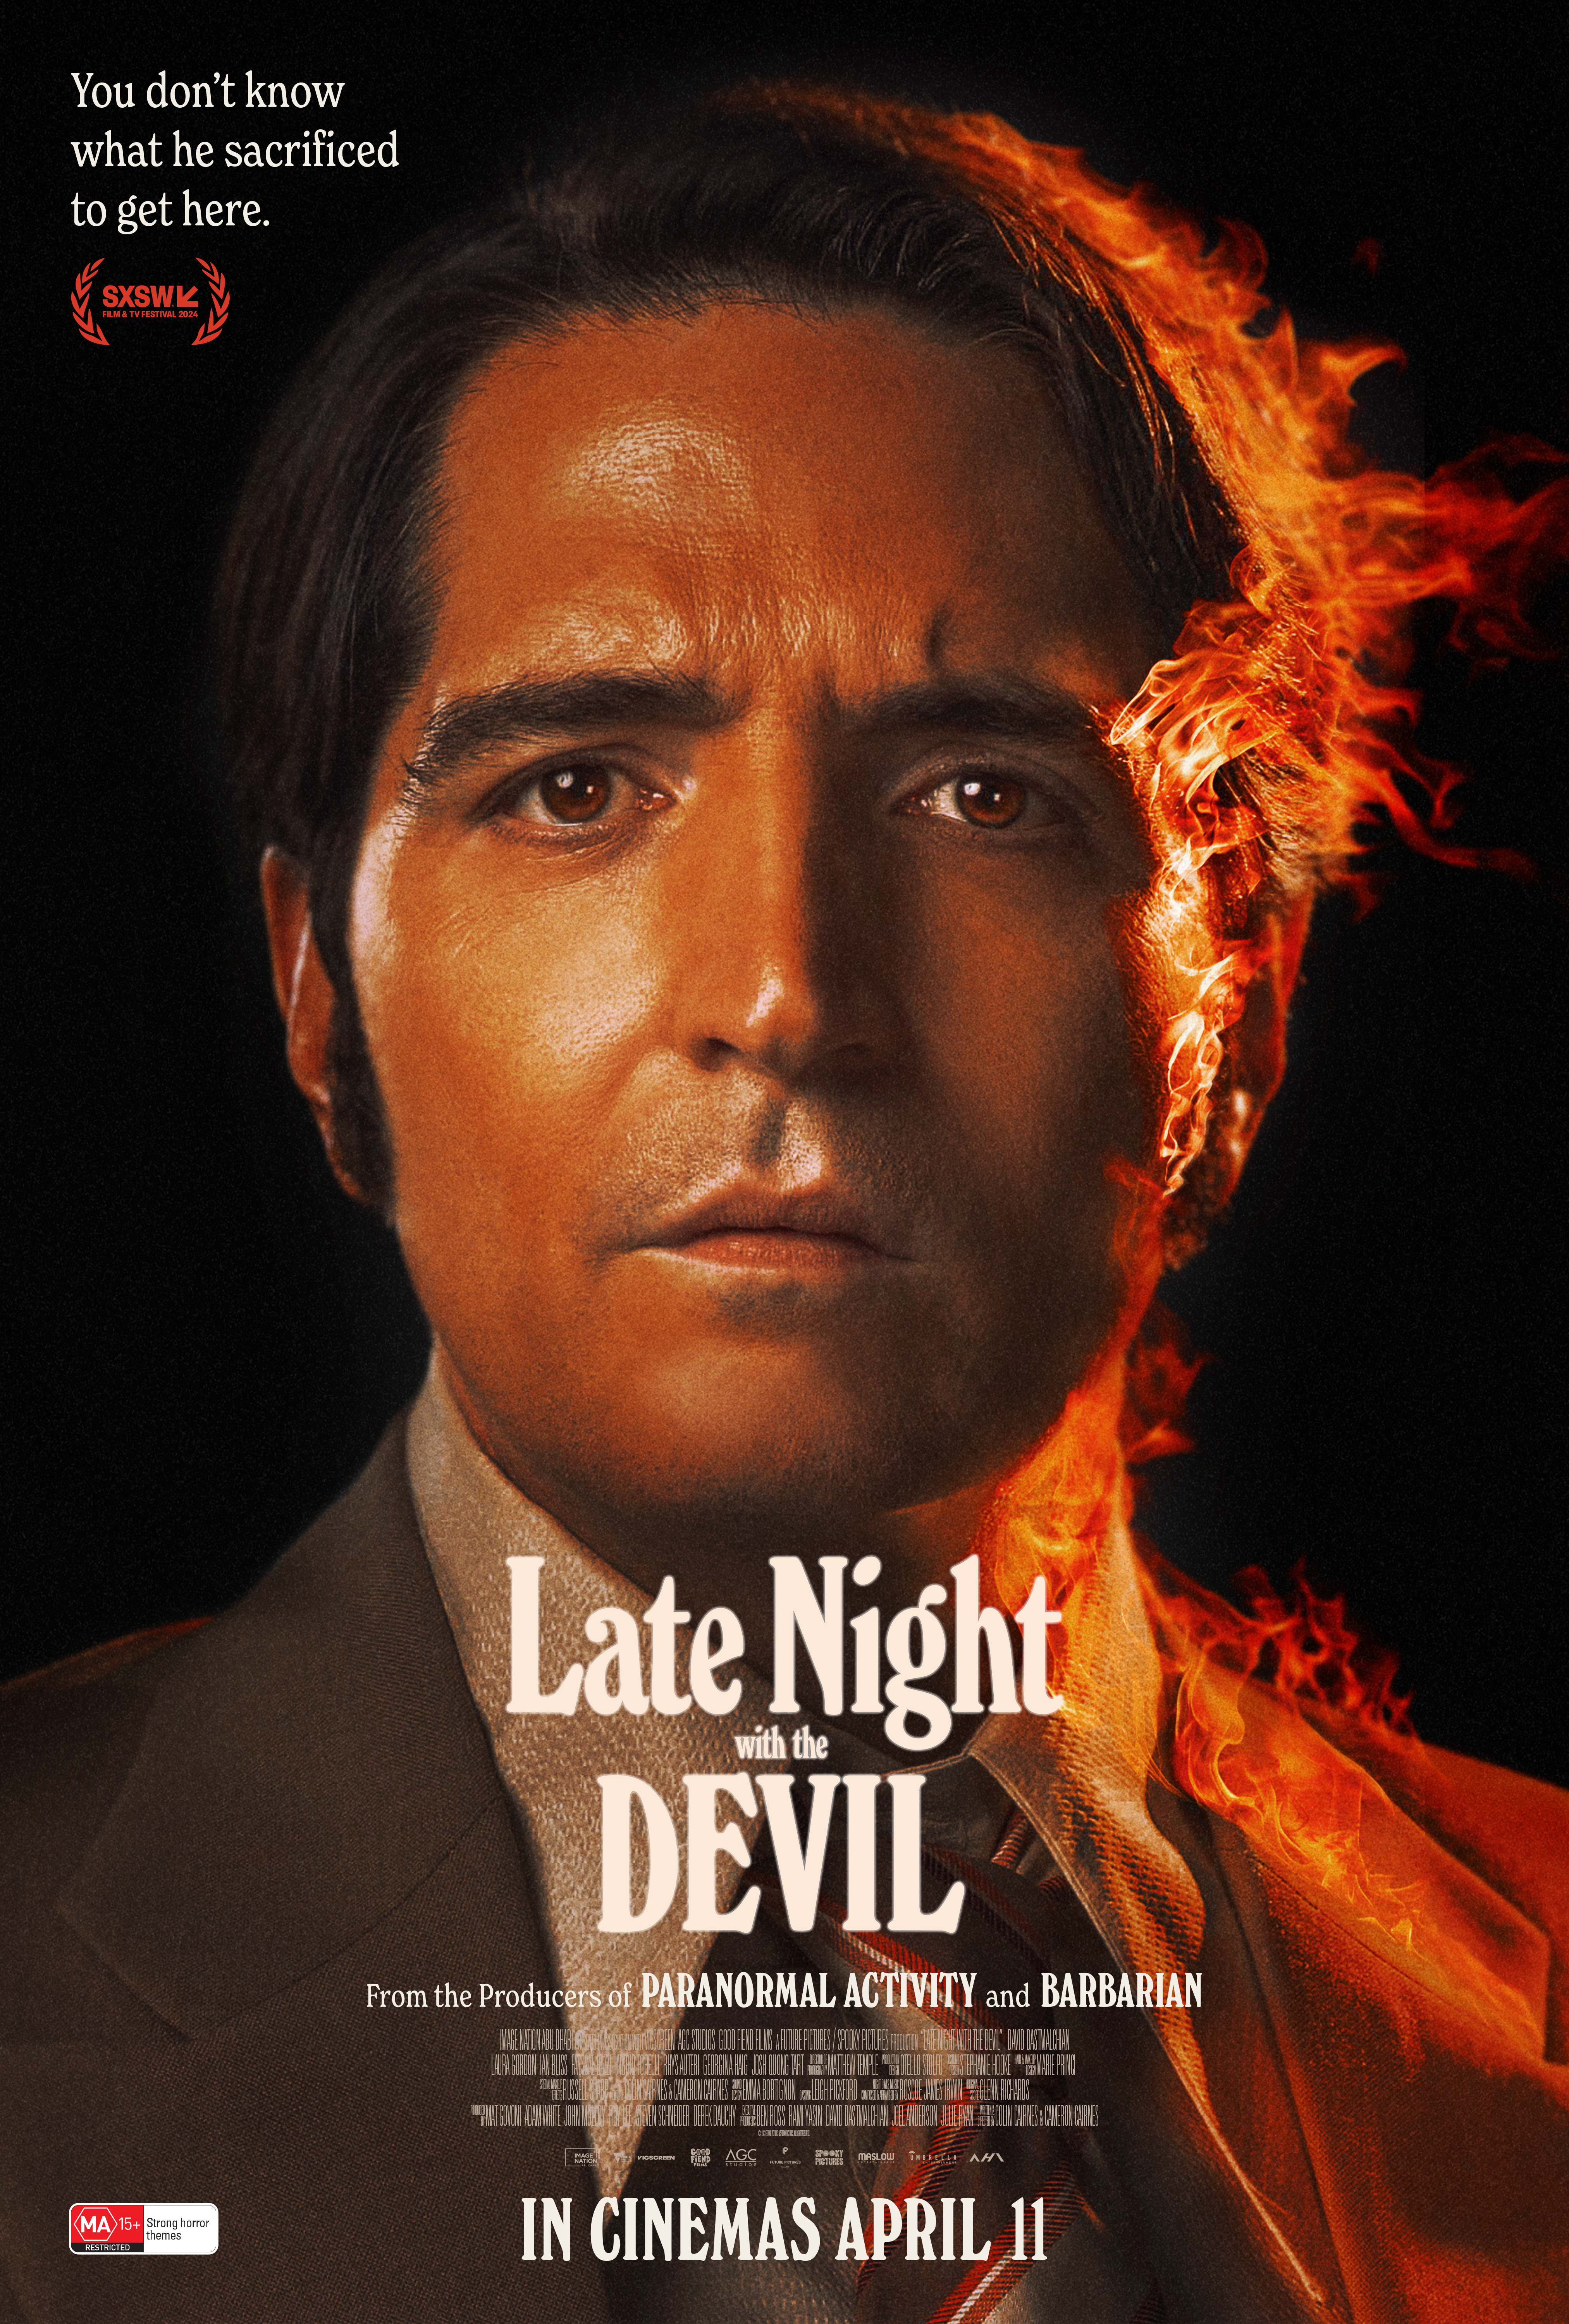 LATE NIGHT WITH THE DEVIL Key Art